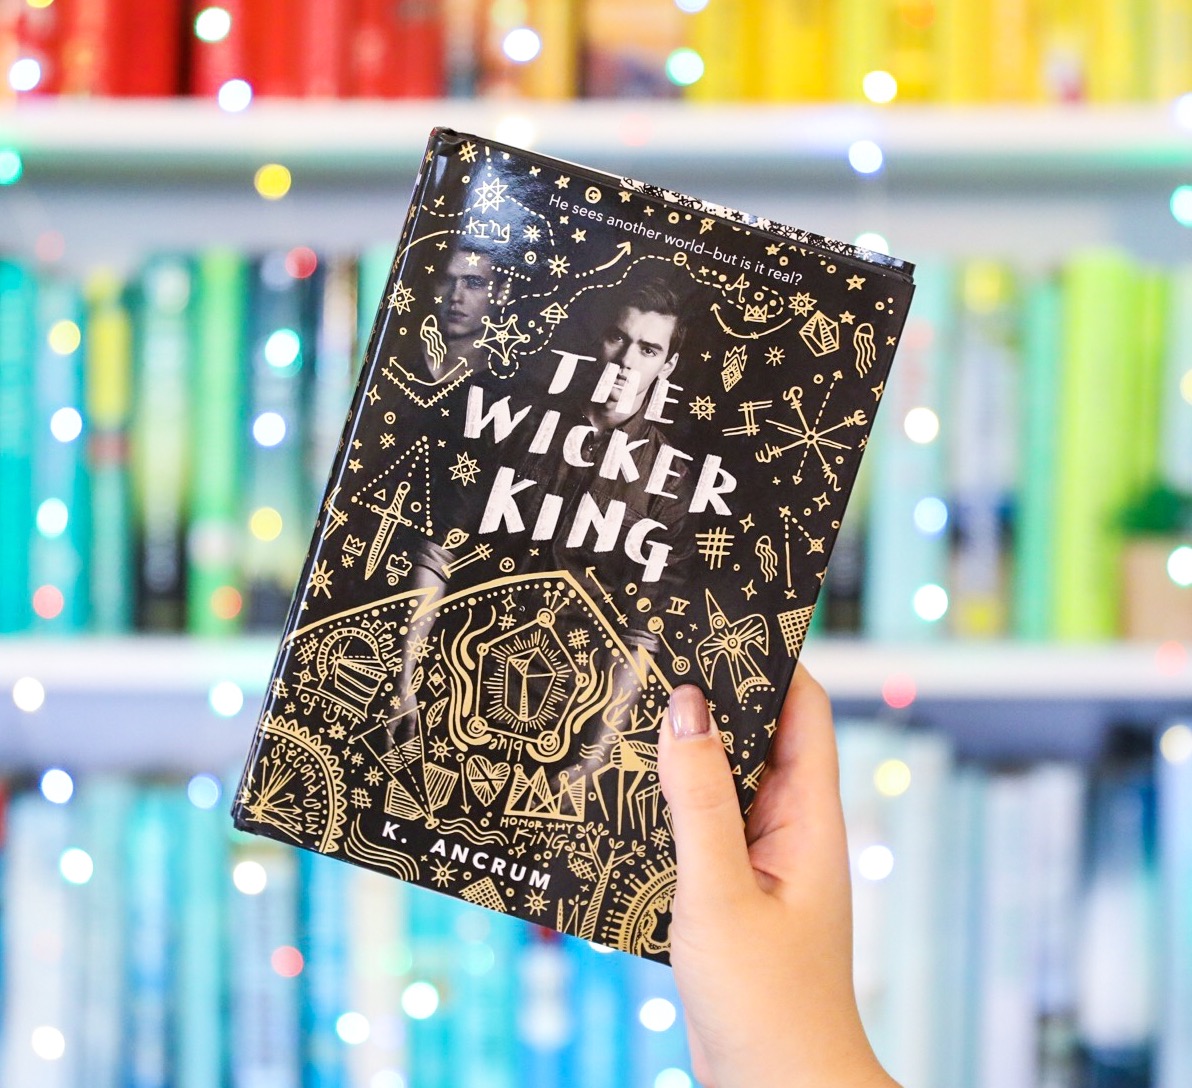 This book yet. This book. The Wicker King book Art.